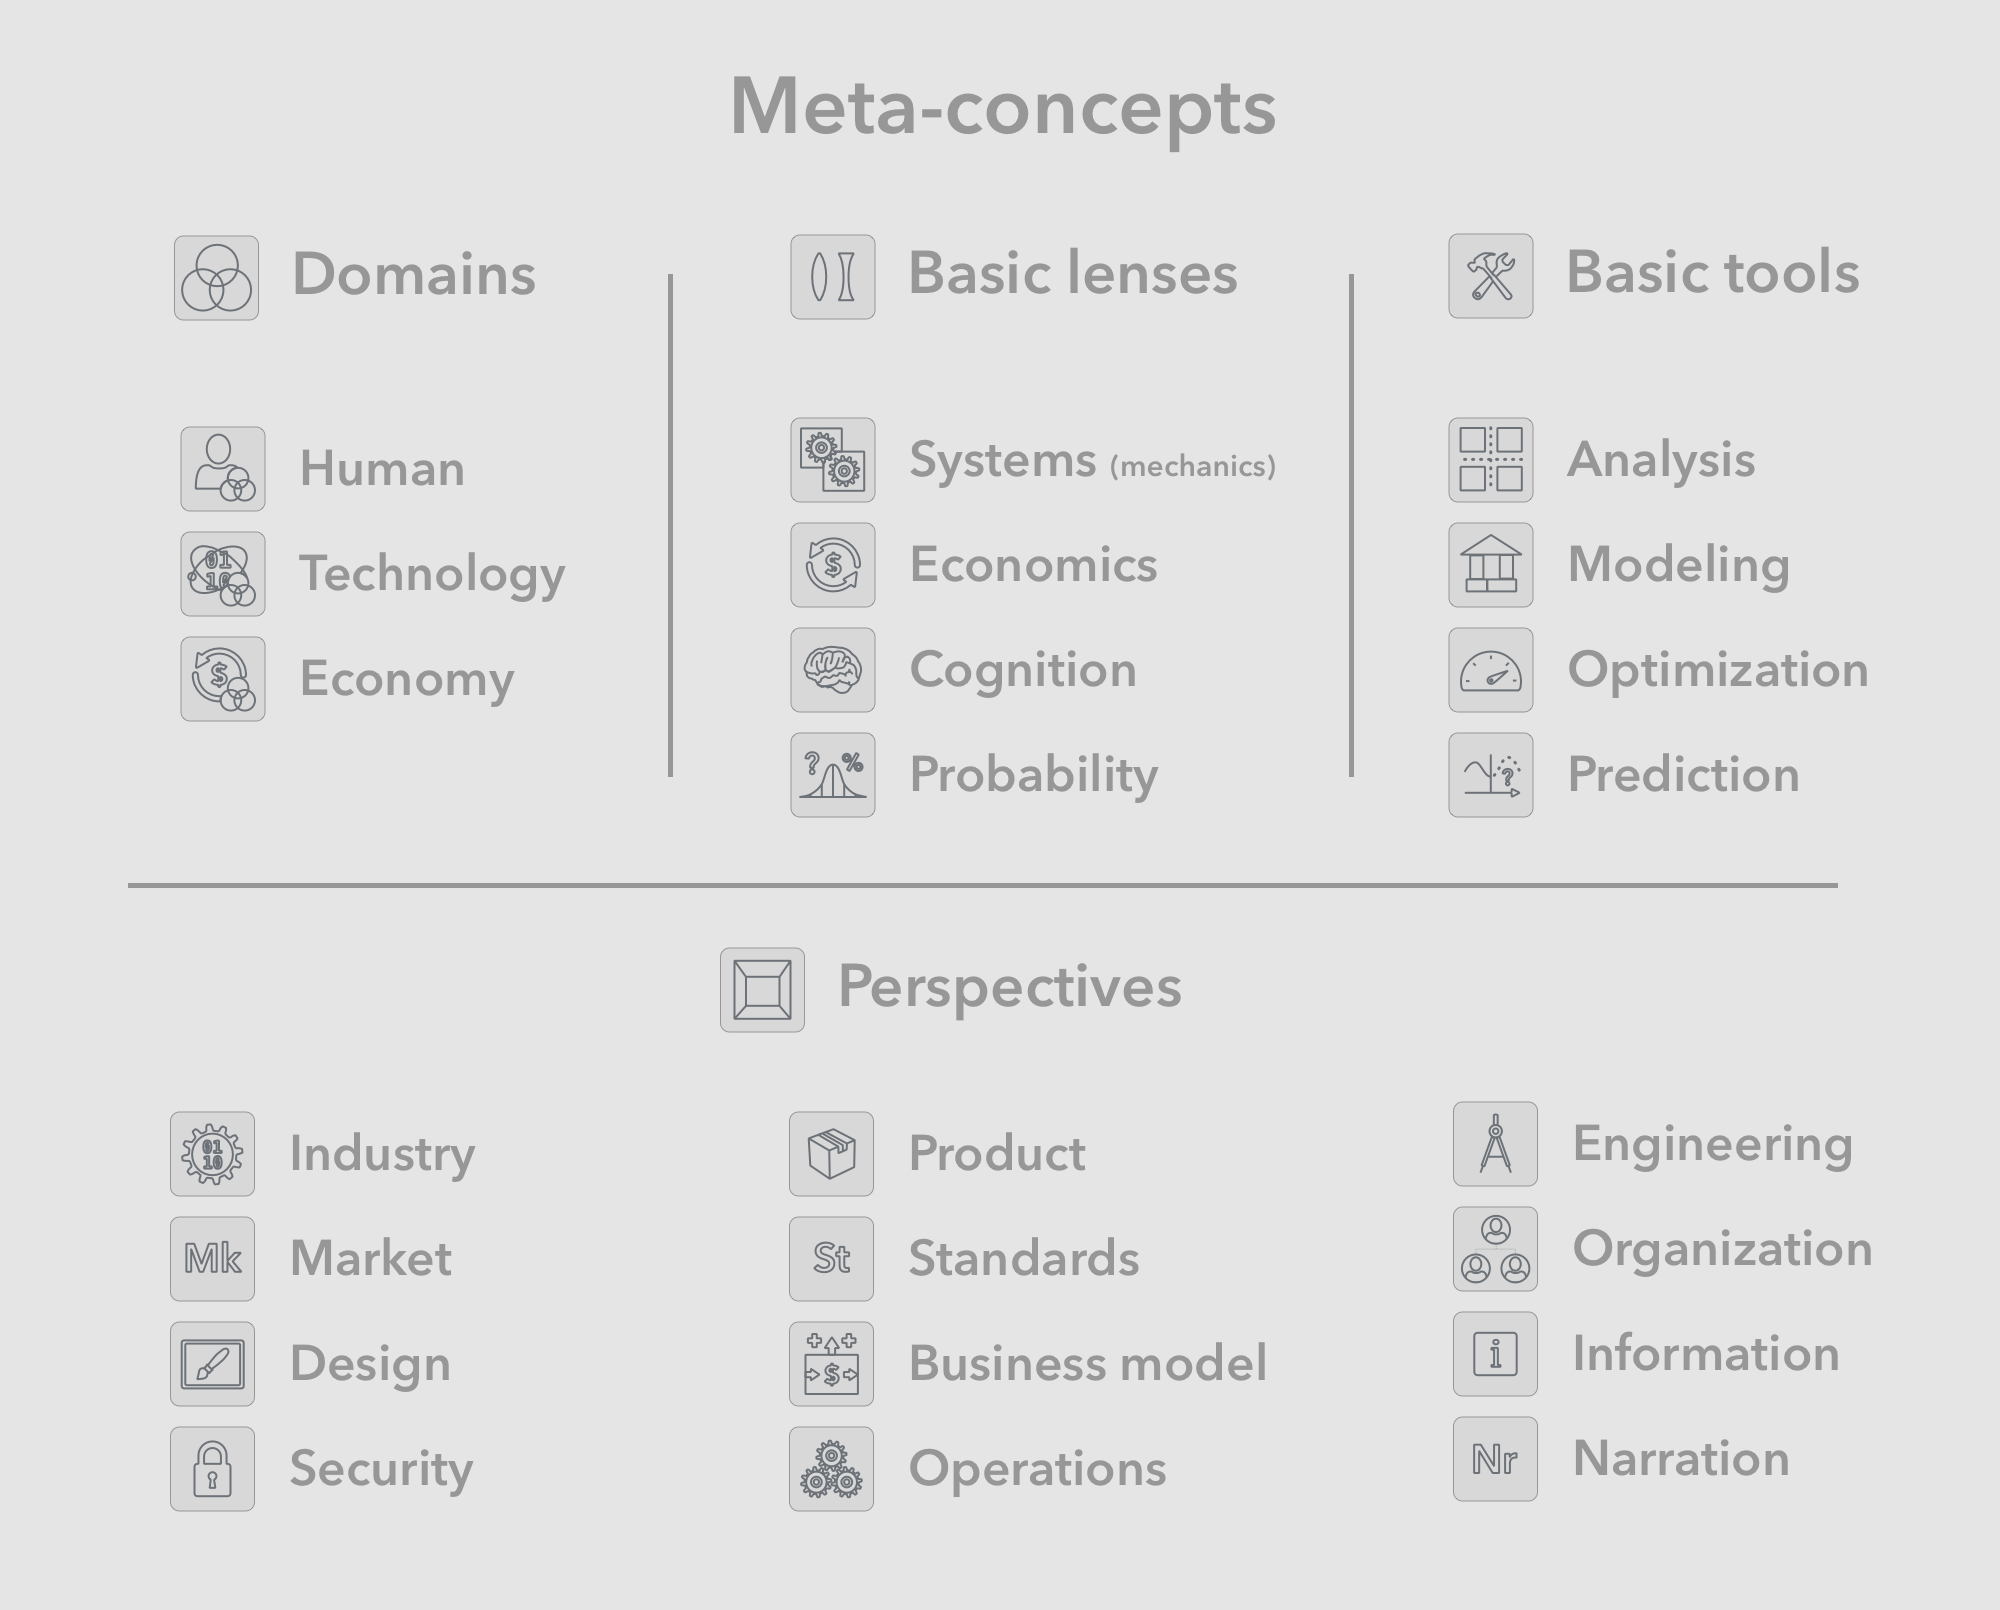 Mapping meta-concepts